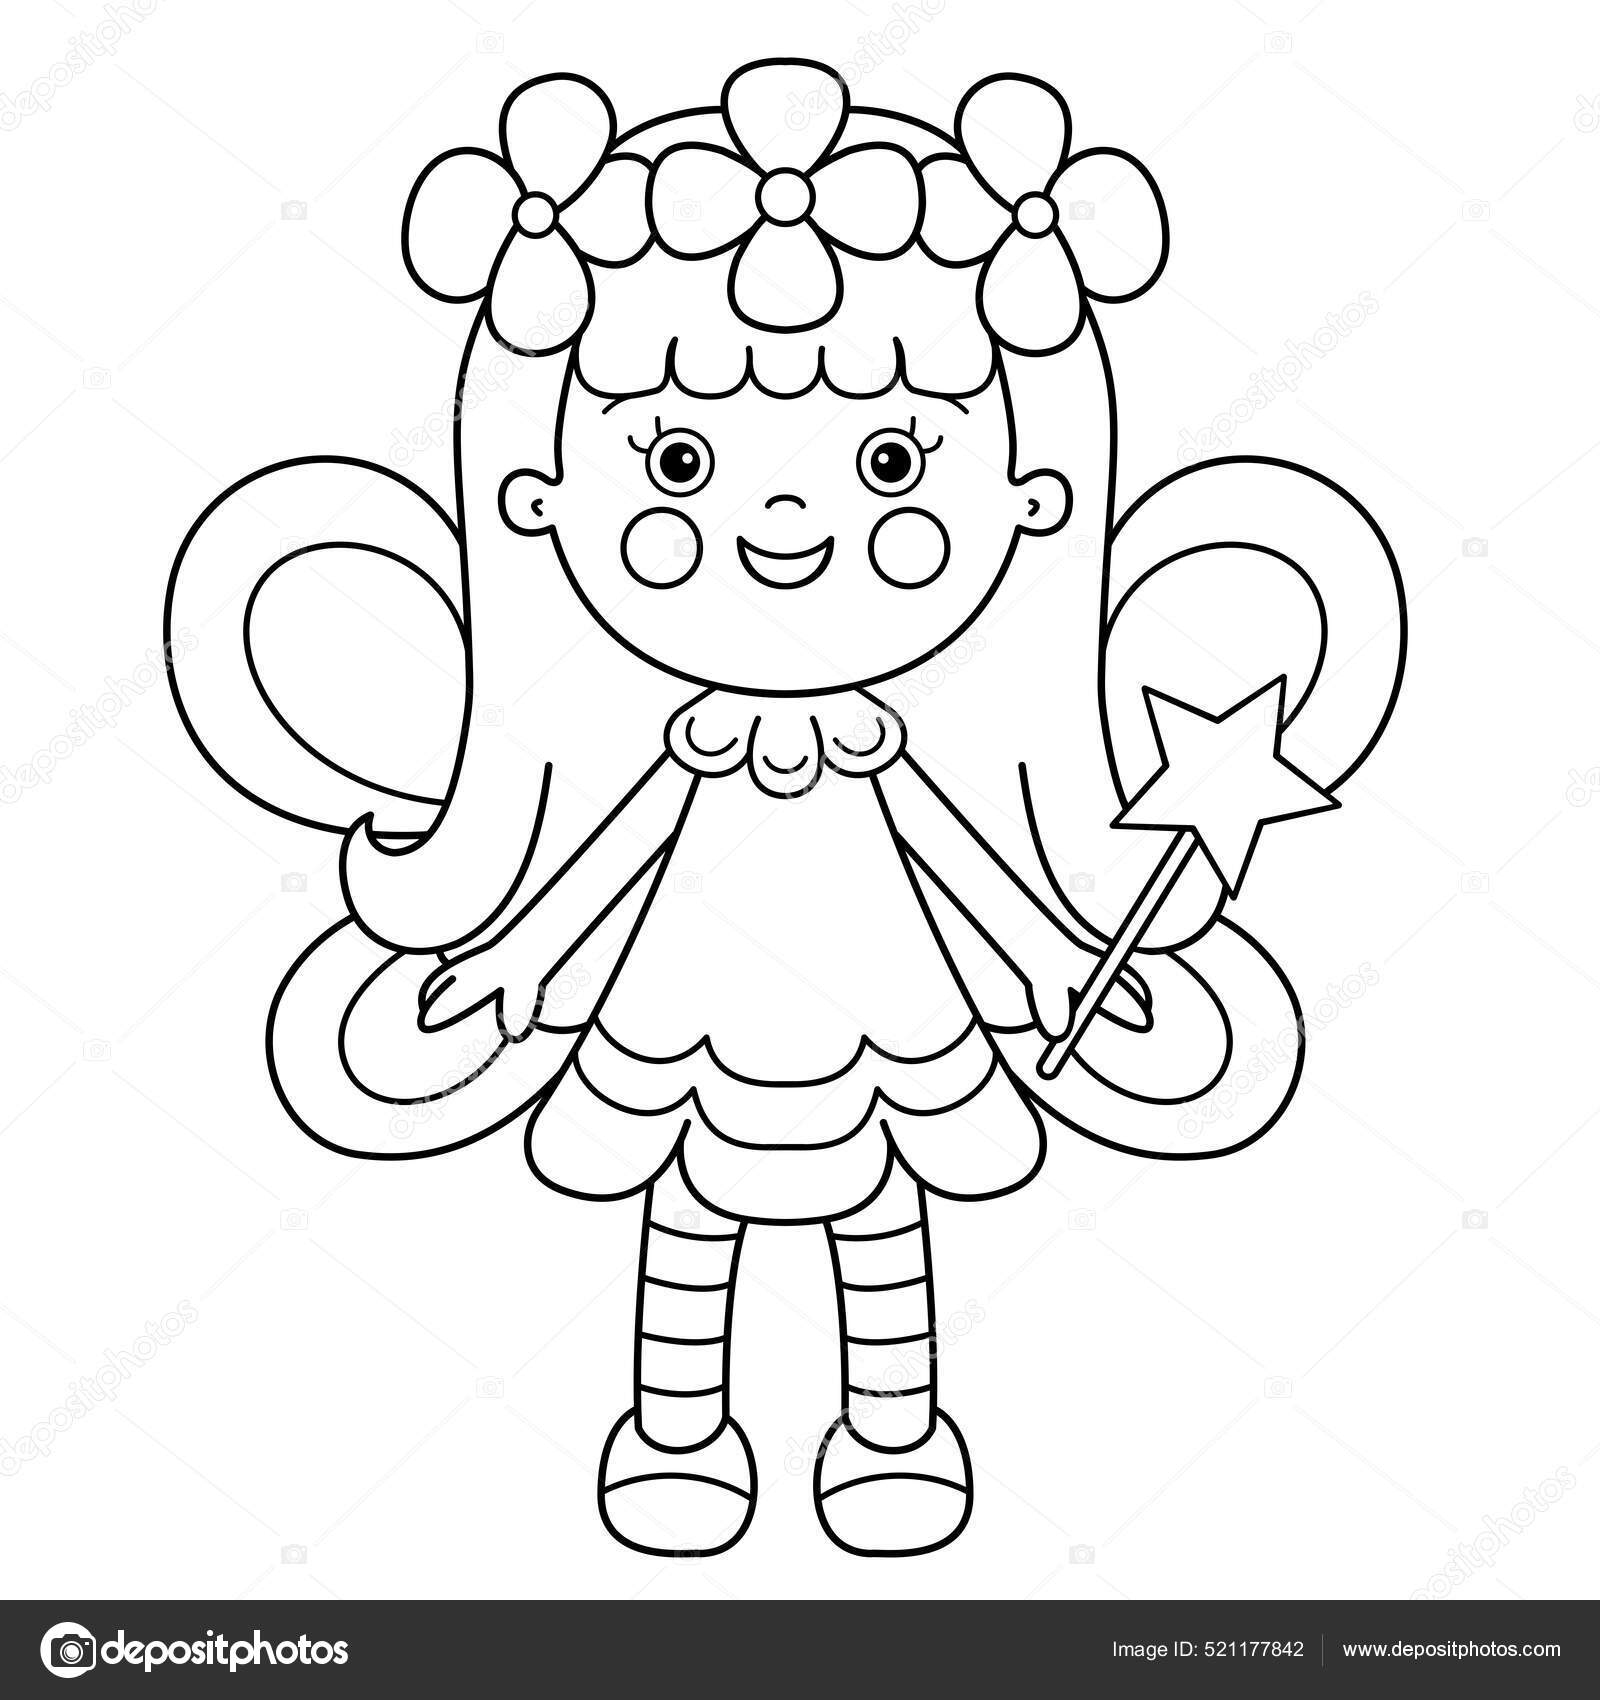 Coloring page outline cartoon flower fairy magic wand little kind stock vector by oleon